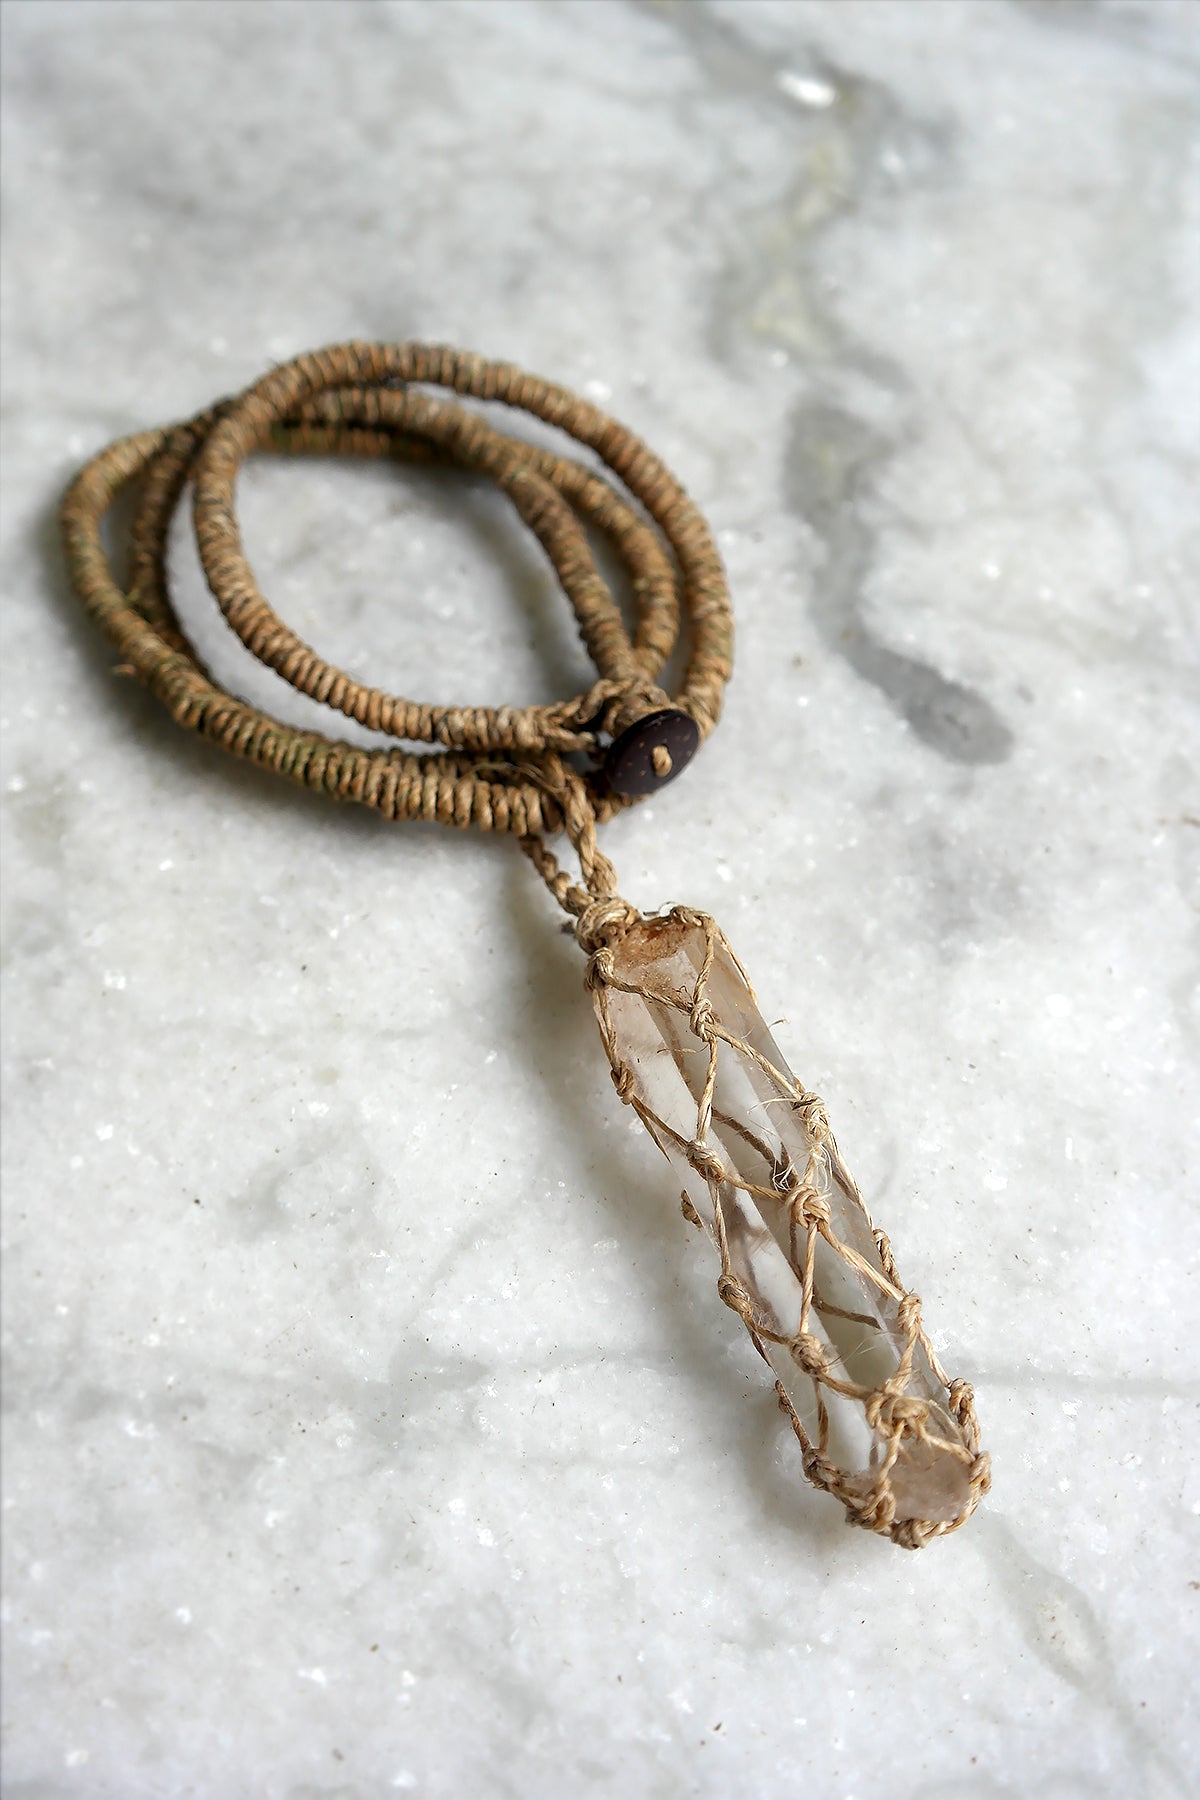 Hemp Necklace with Metal and Wooden Beads | eBay